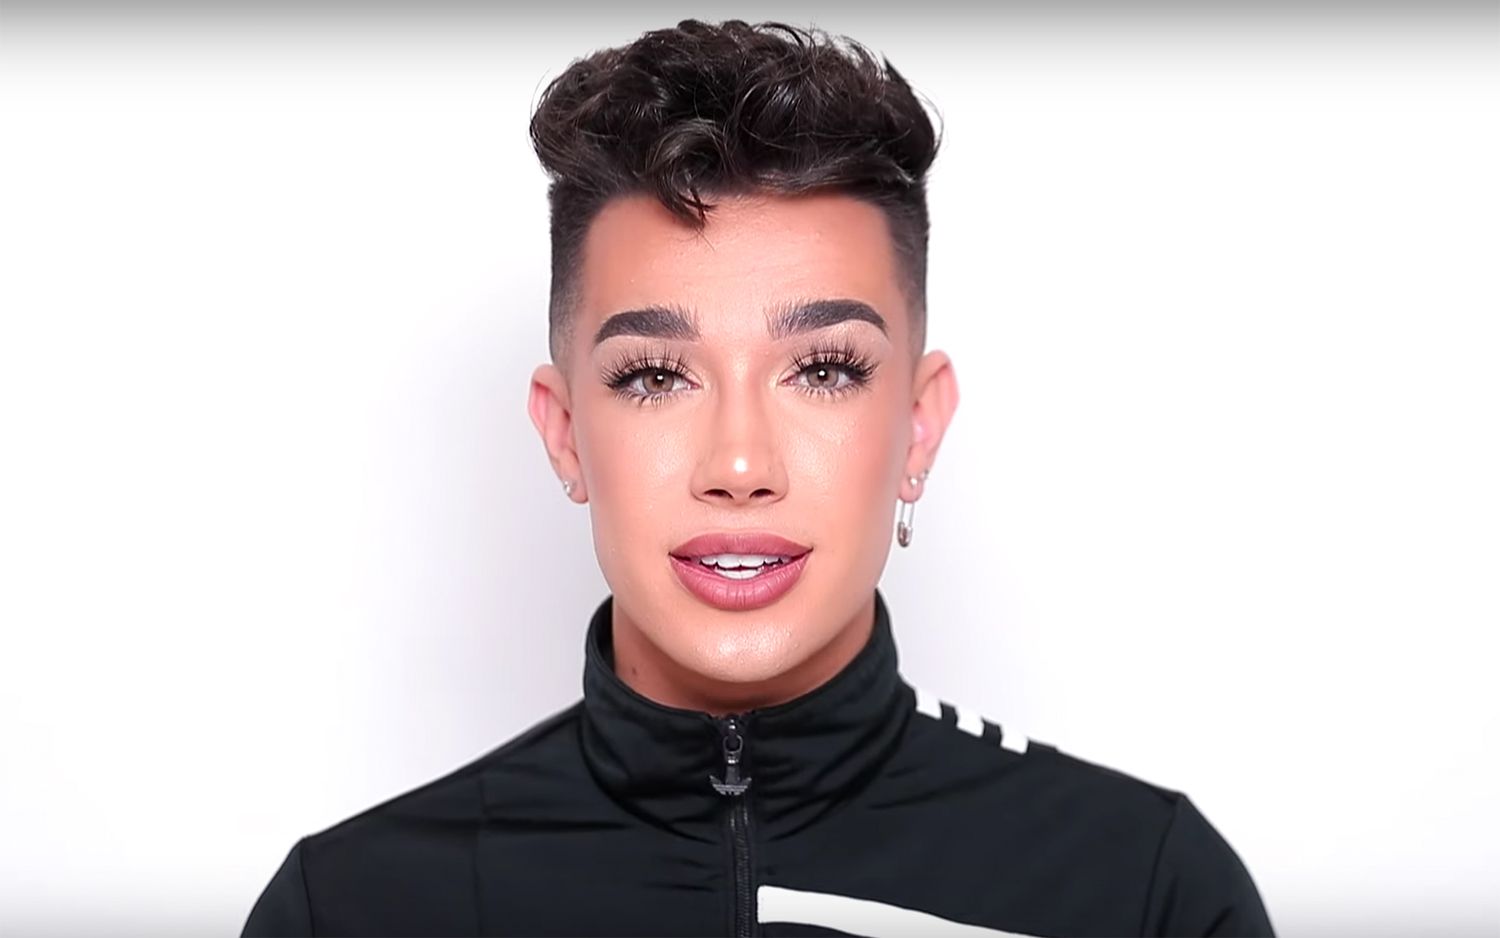 You're interested in the popular video creator James Charles
